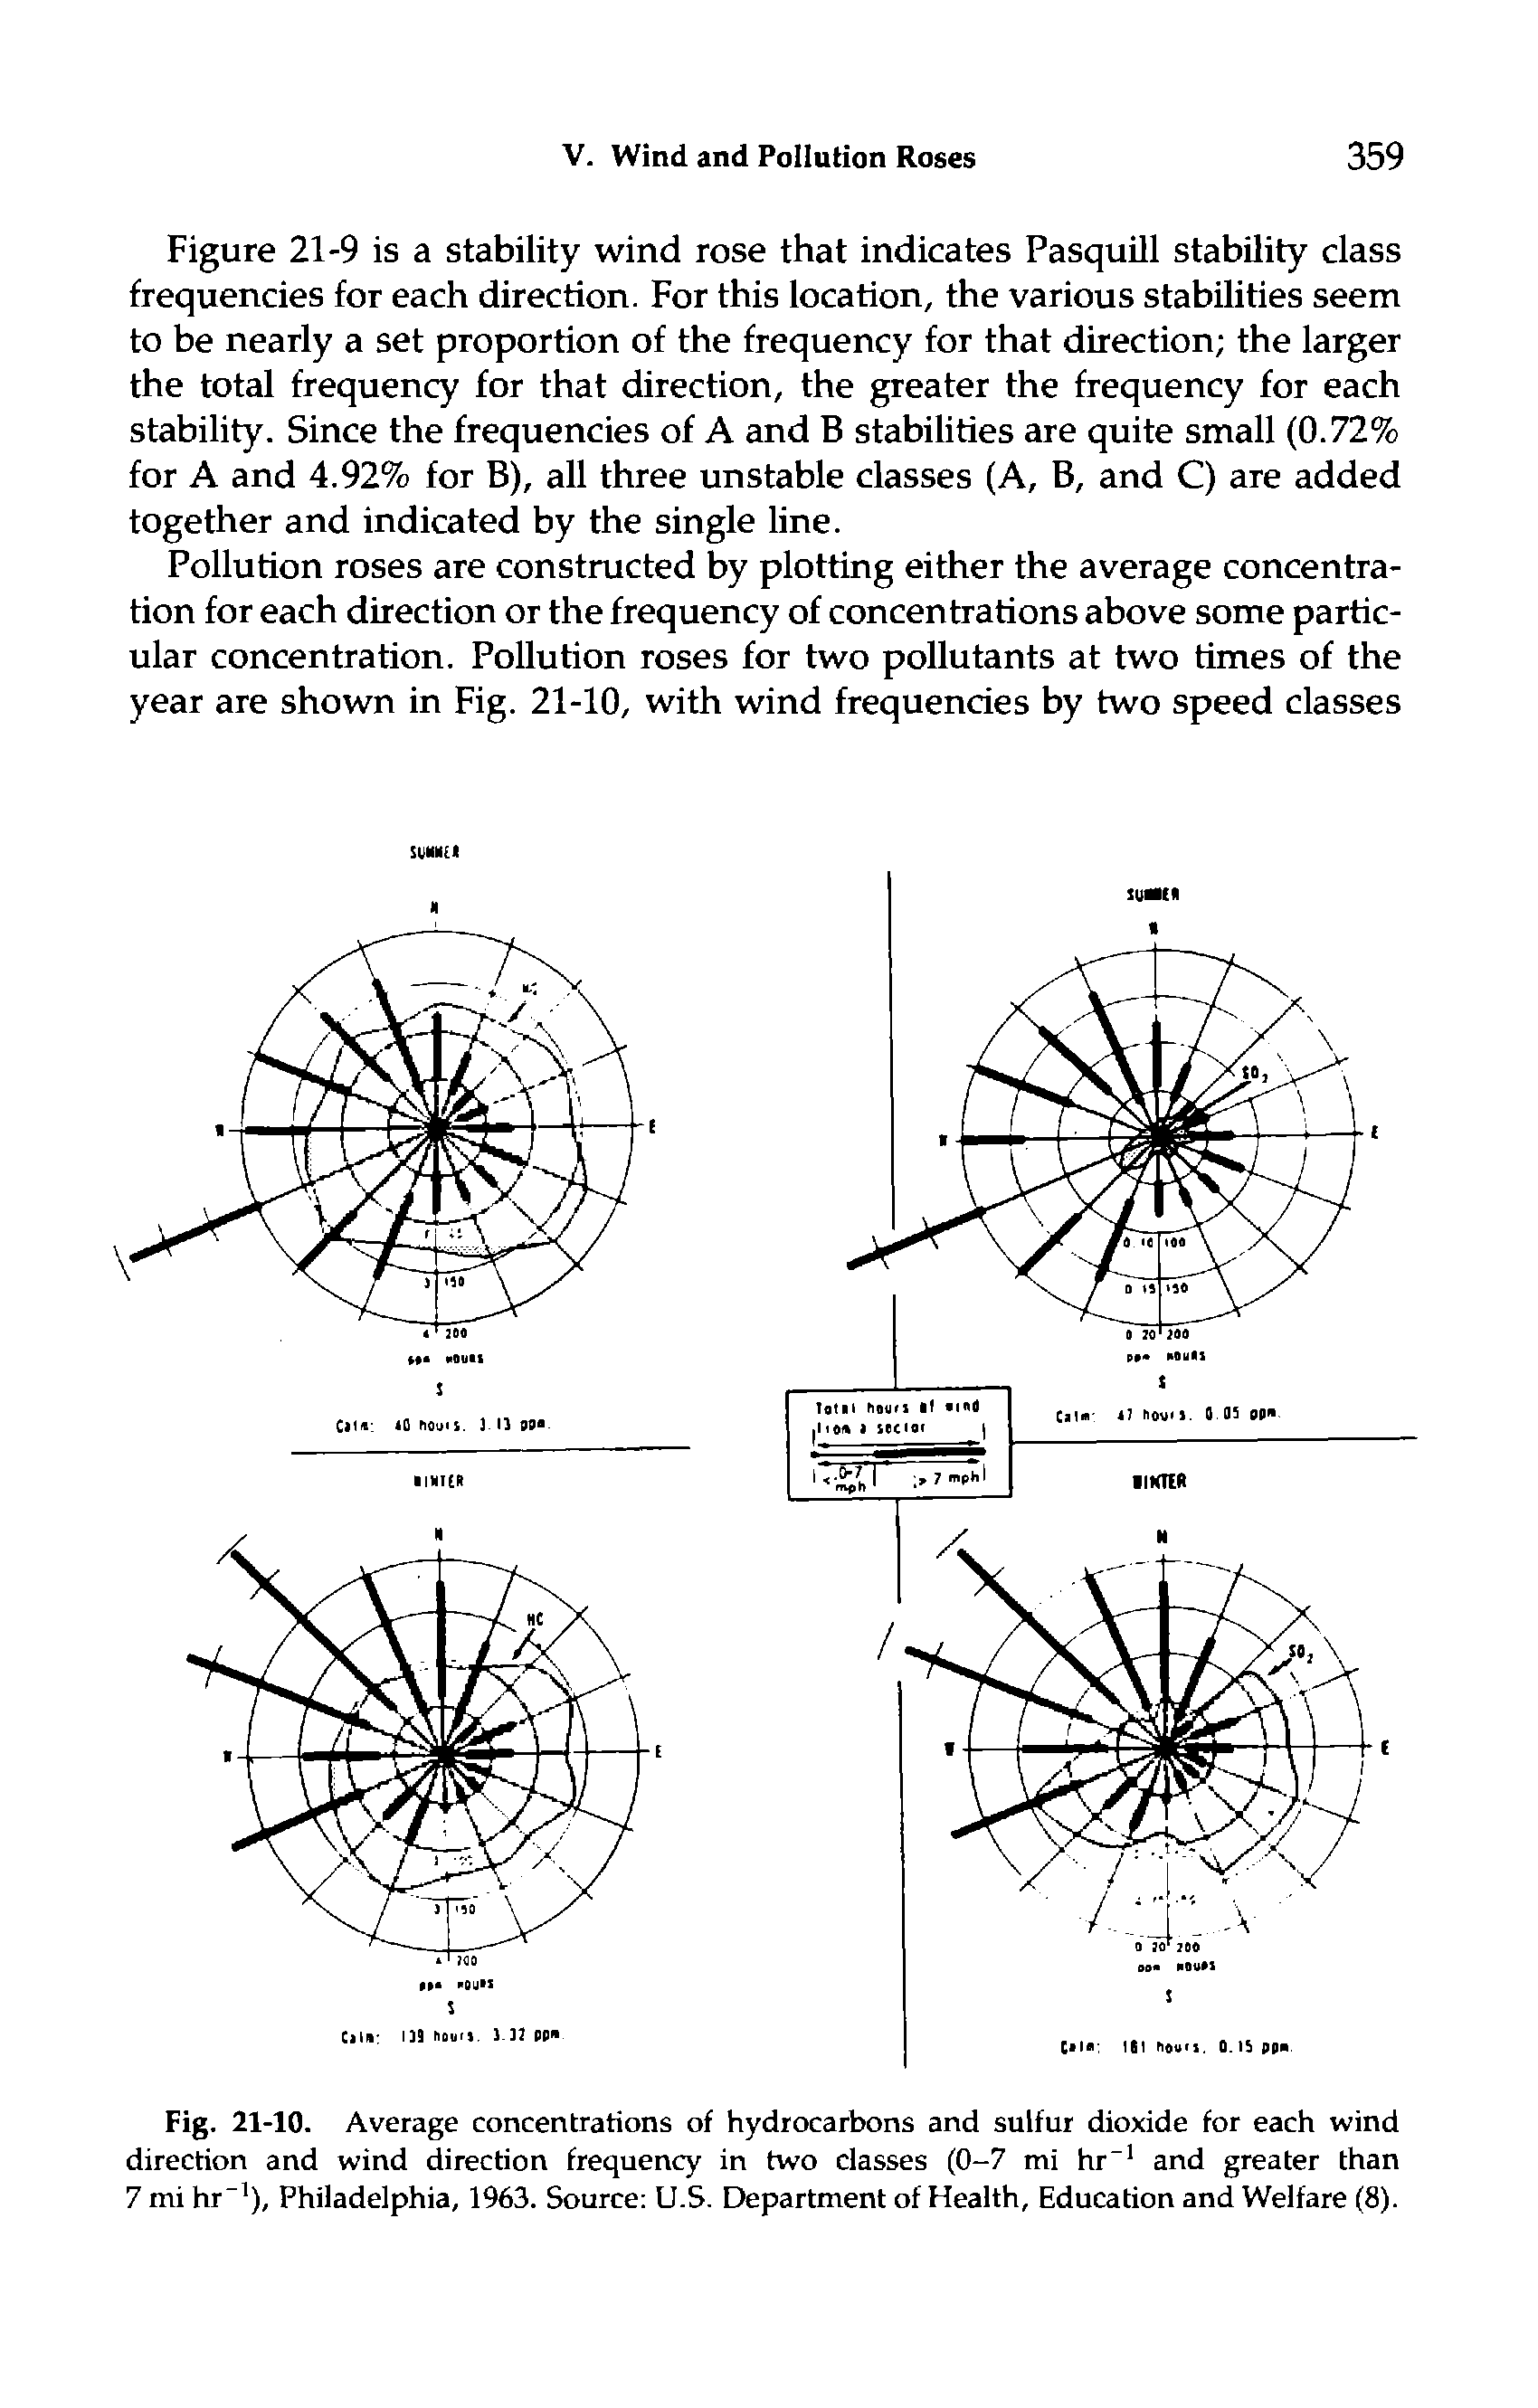 Fig. 21-10. Average concentrations of hydrocarbons and sulfur dioxide for each wind direction and wind direction frequency in two classes (0-7 mi hr and greater than 7 mi hr ), Philadelphia, 1963. Source U.S. Department of Health, Education and Welfare (8).